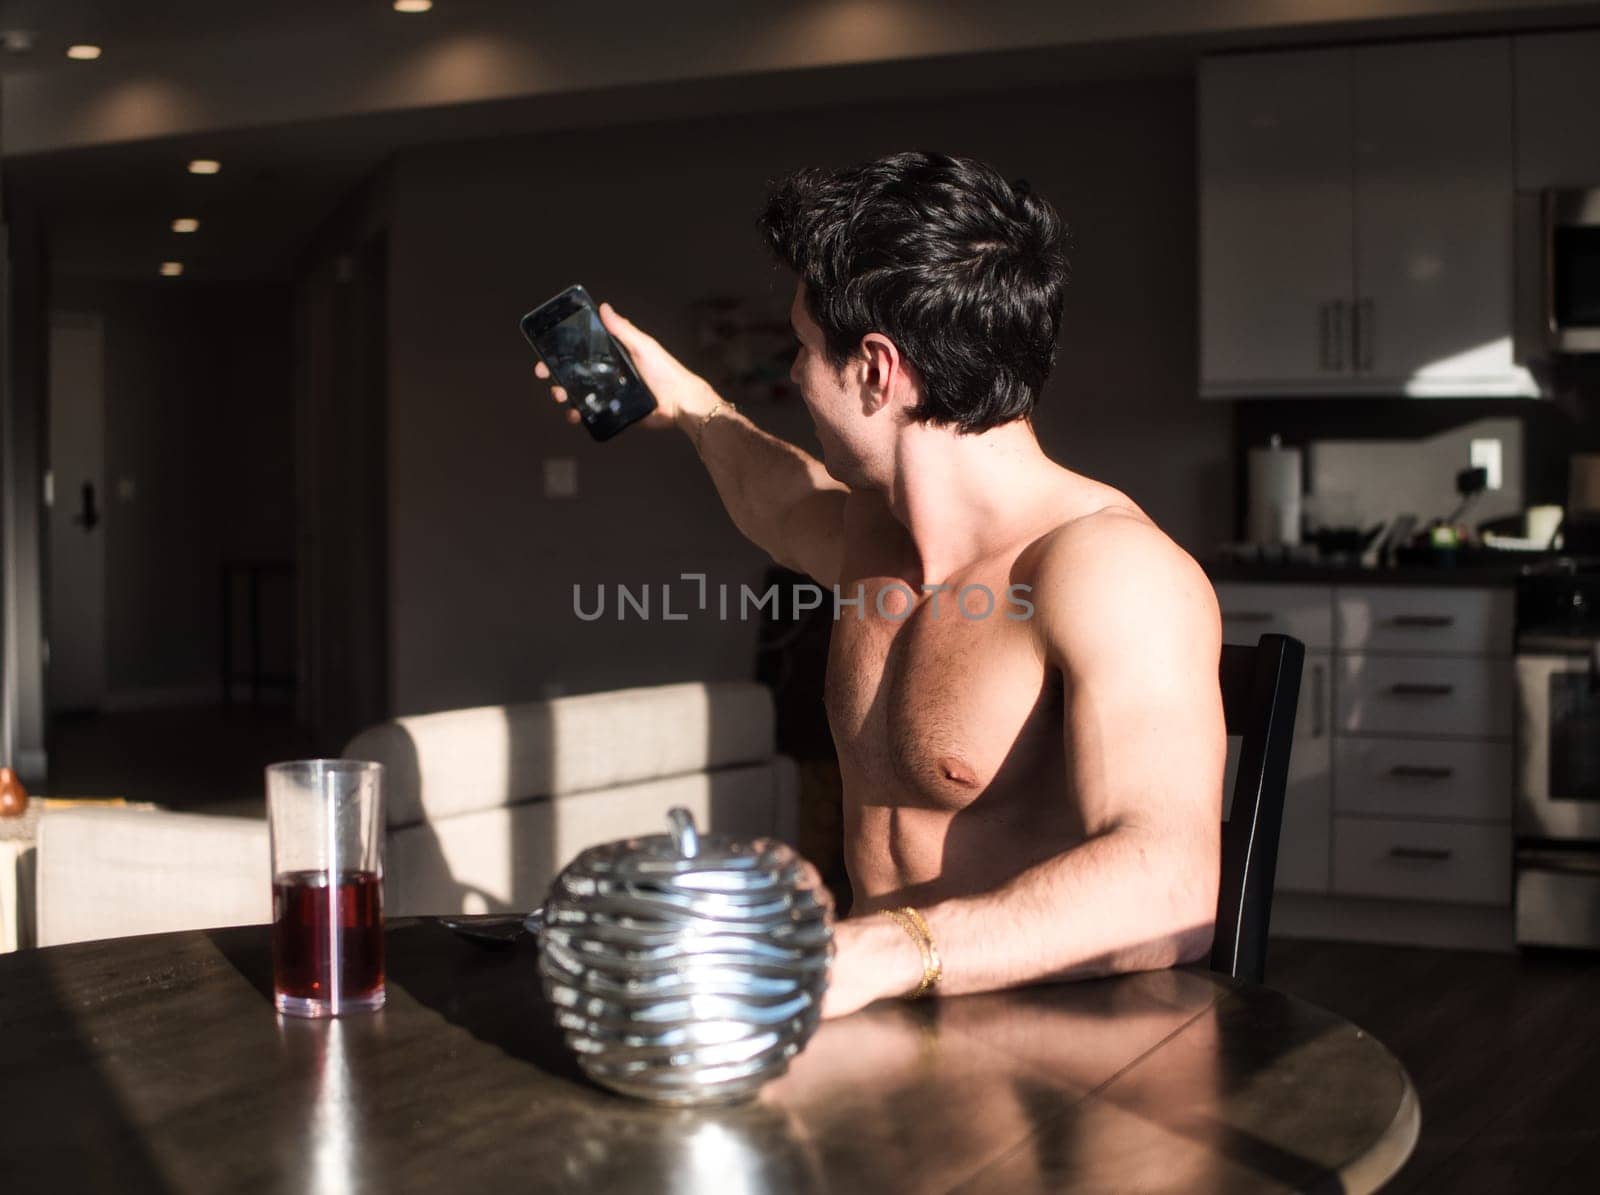 Photo of a man capturing a self-portrait at a table in the morning light by artofphoto